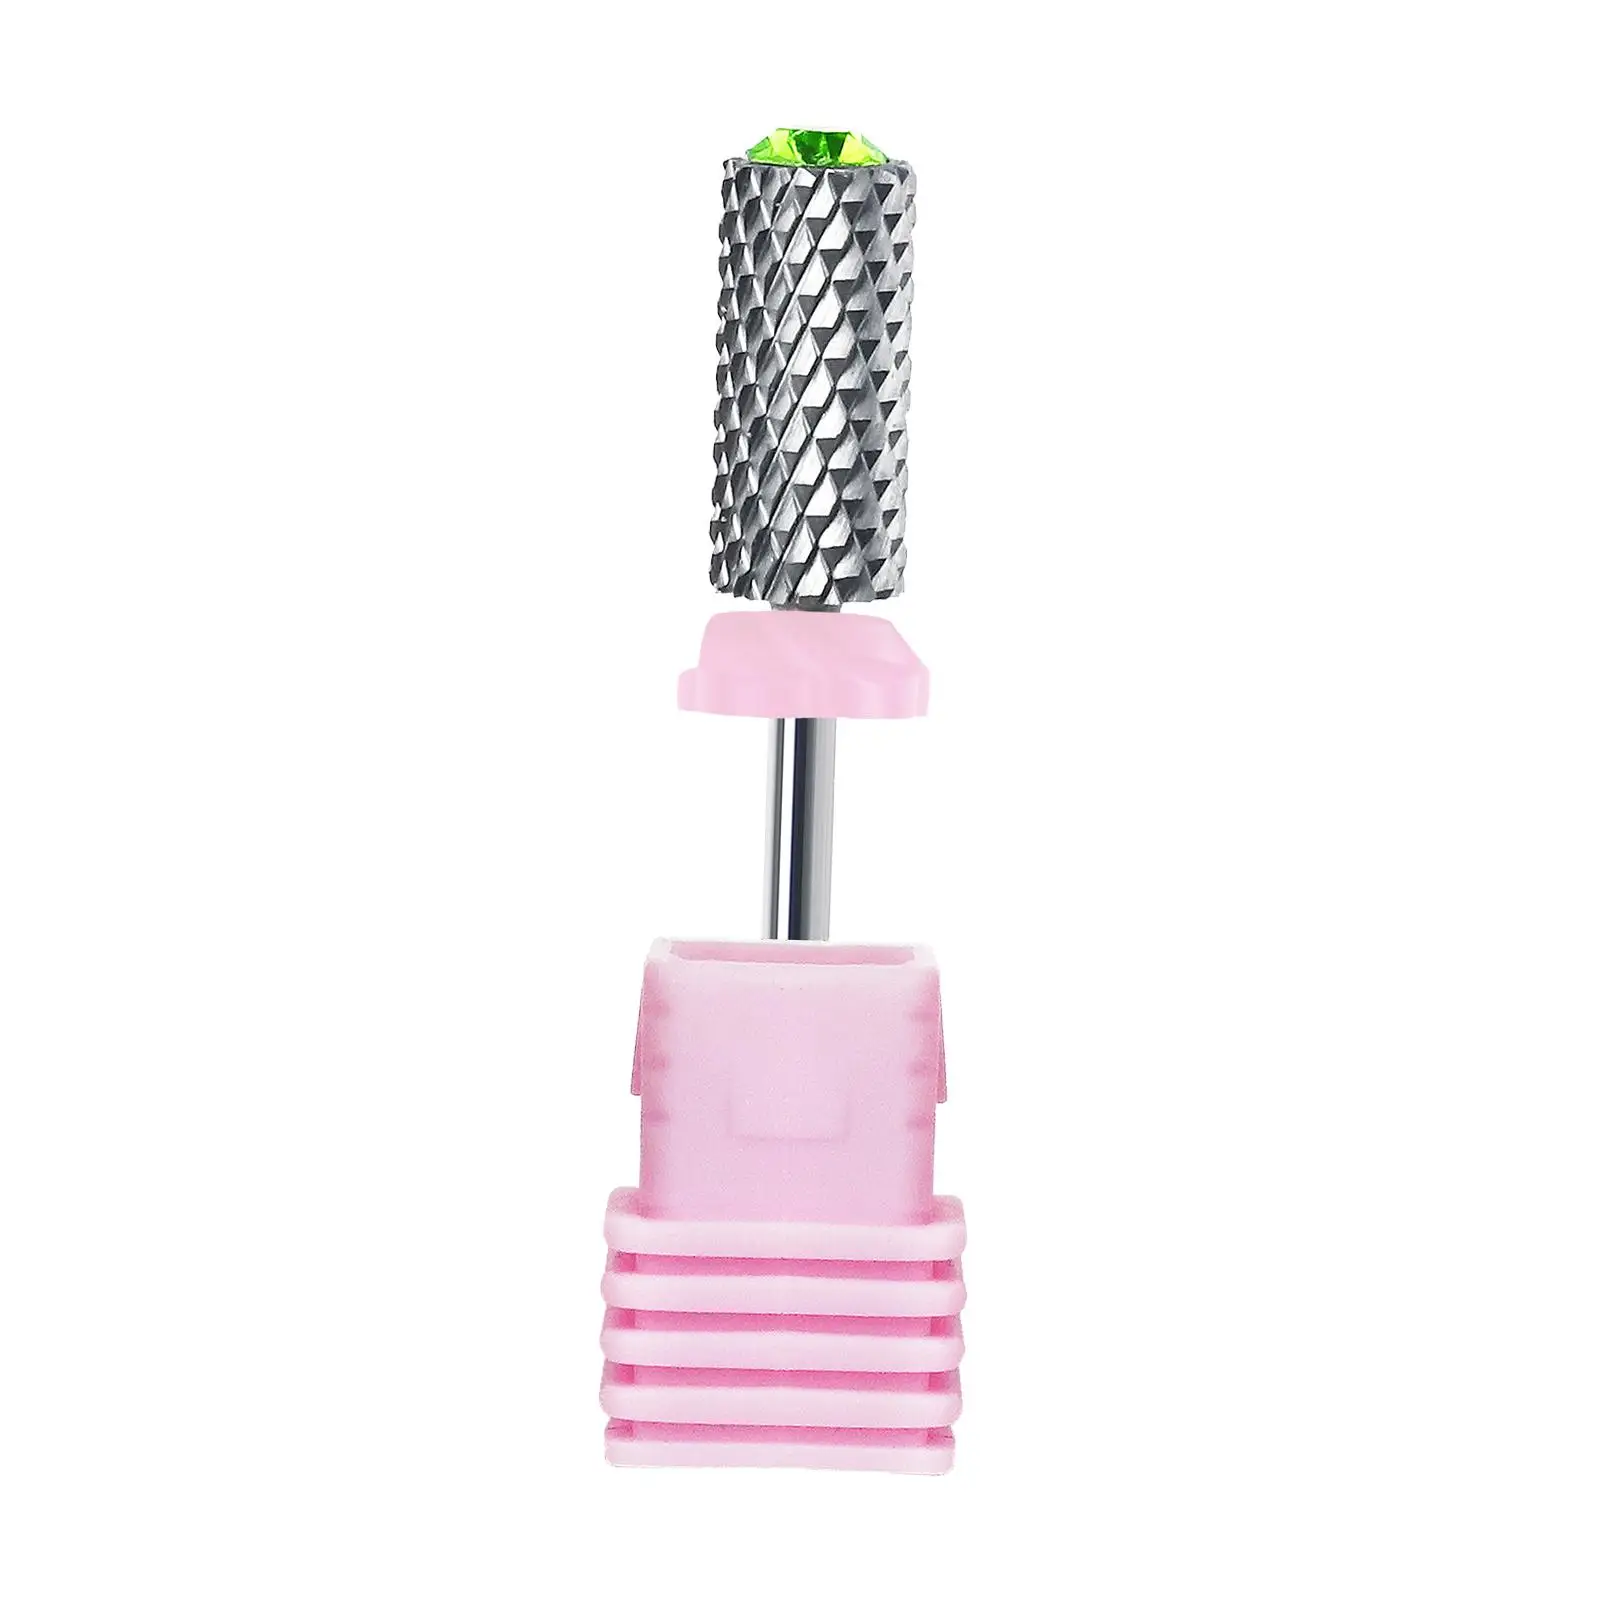 Nail Drill Bit Accessories Electric Nail File Machine Bit Rotary Burrs Cuticle Remover Bit for Acrylic Gel Nails Salon Home Use